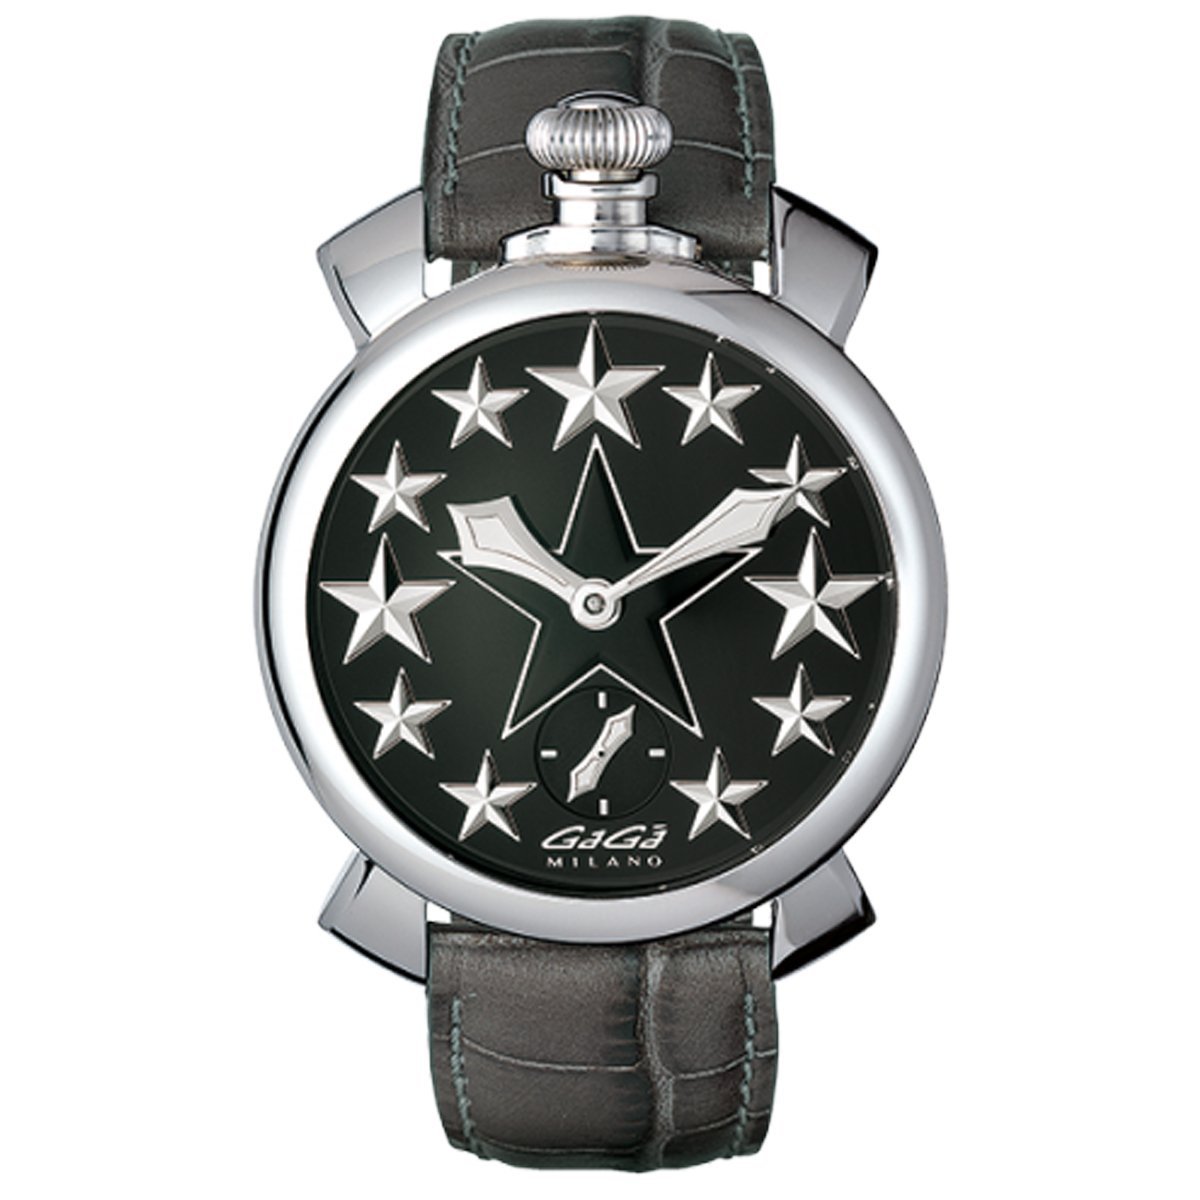 GaGà Milano Manuale 48MM Men's Watch Stars Grey - Watches & Crystals